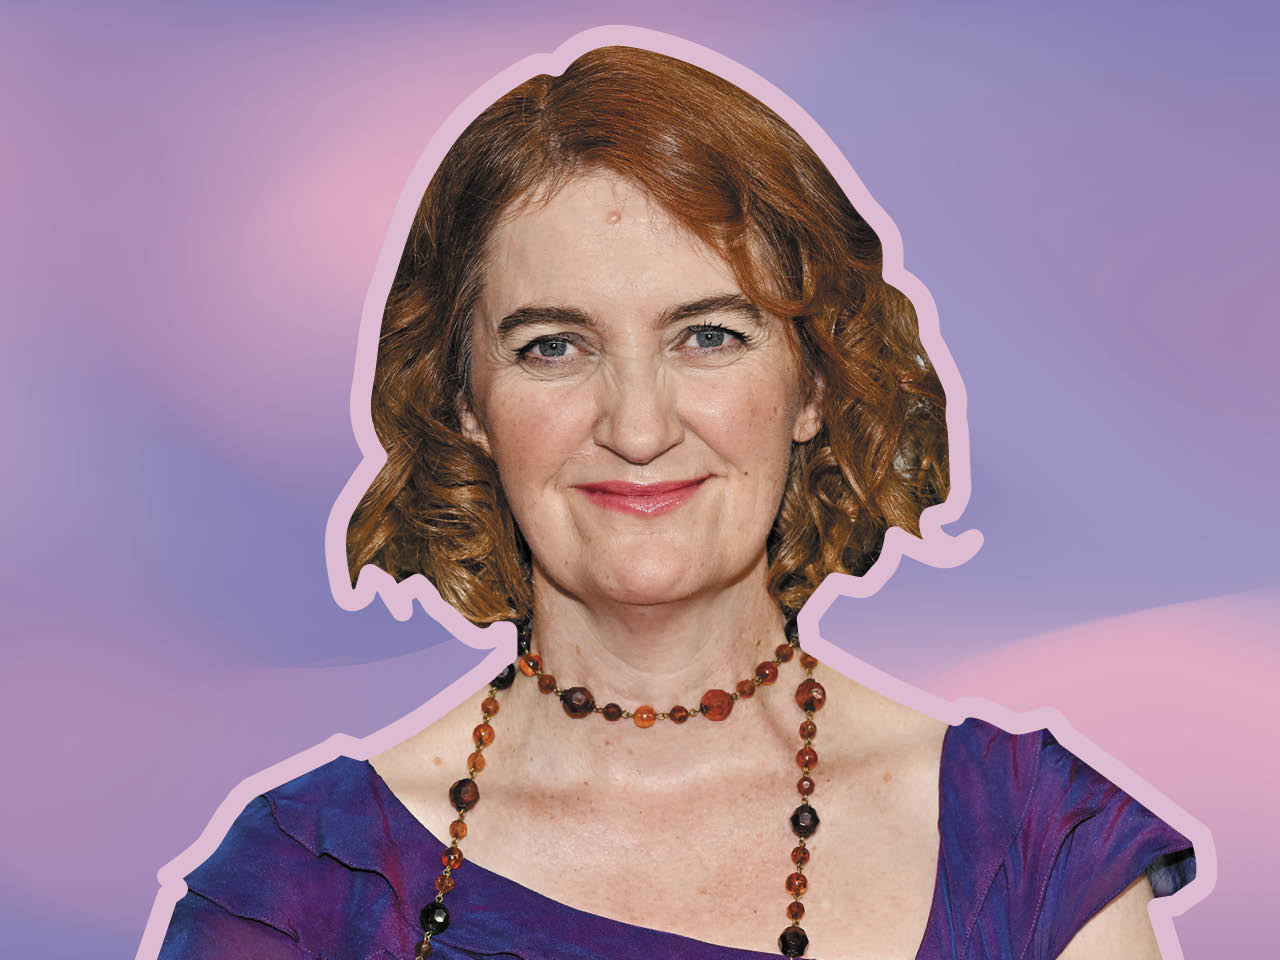 Author Emma Donoghue wearing a purple dress and necklace on a purple background